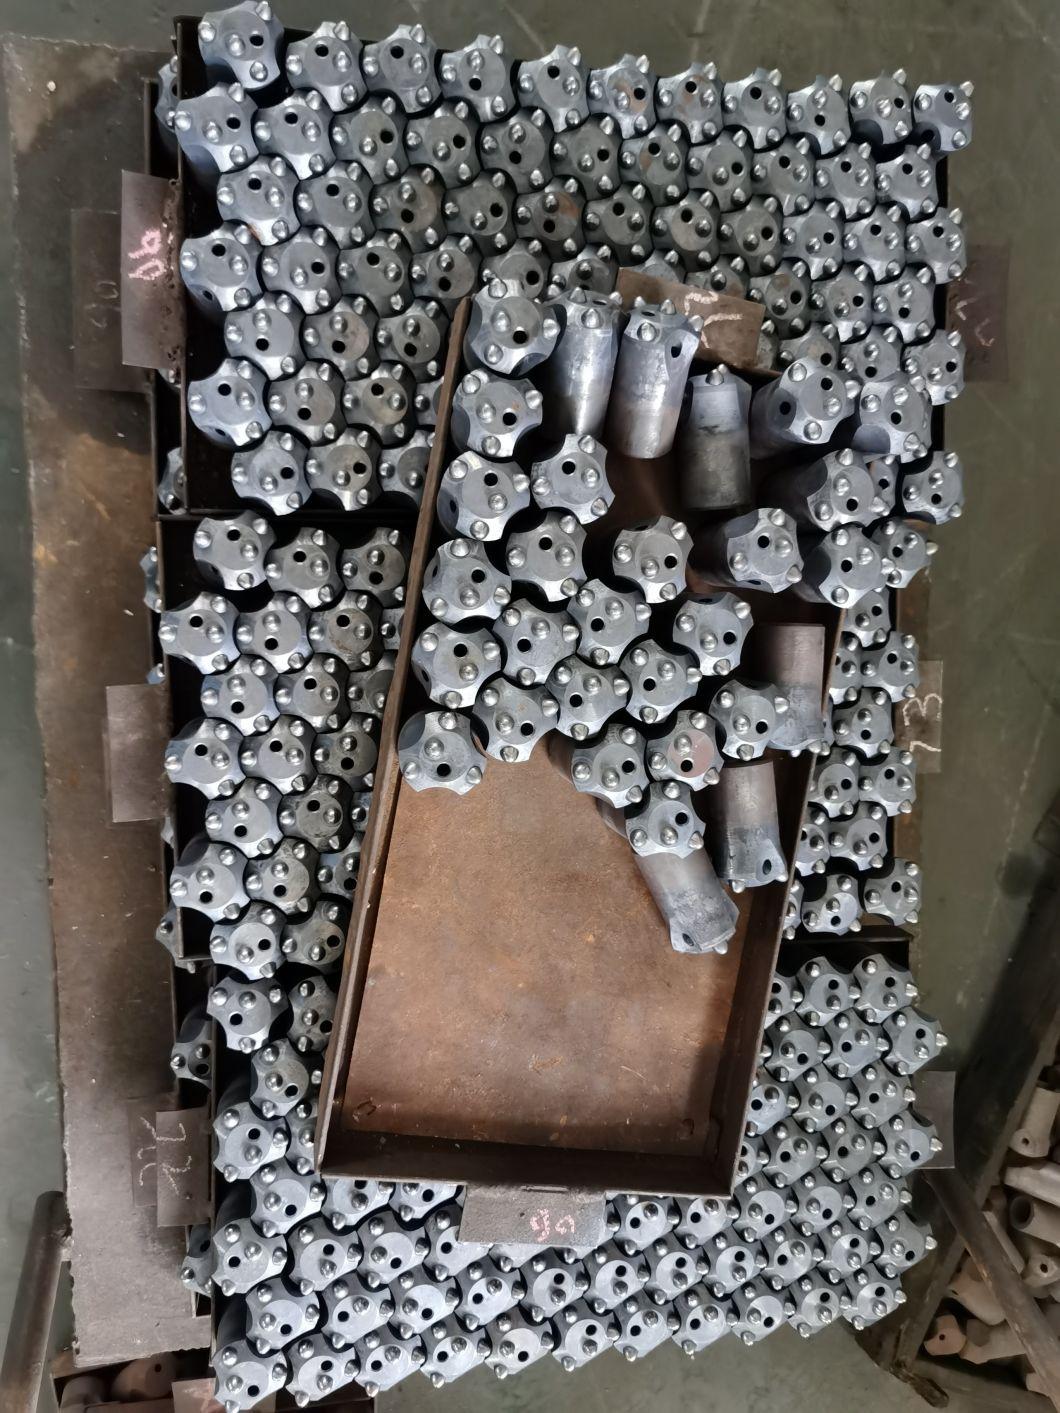 Cost-Effctive Tungsten Carbide Chisels Bit Borehole Mining Taper Cross Bits Drill Bit for Well Mining